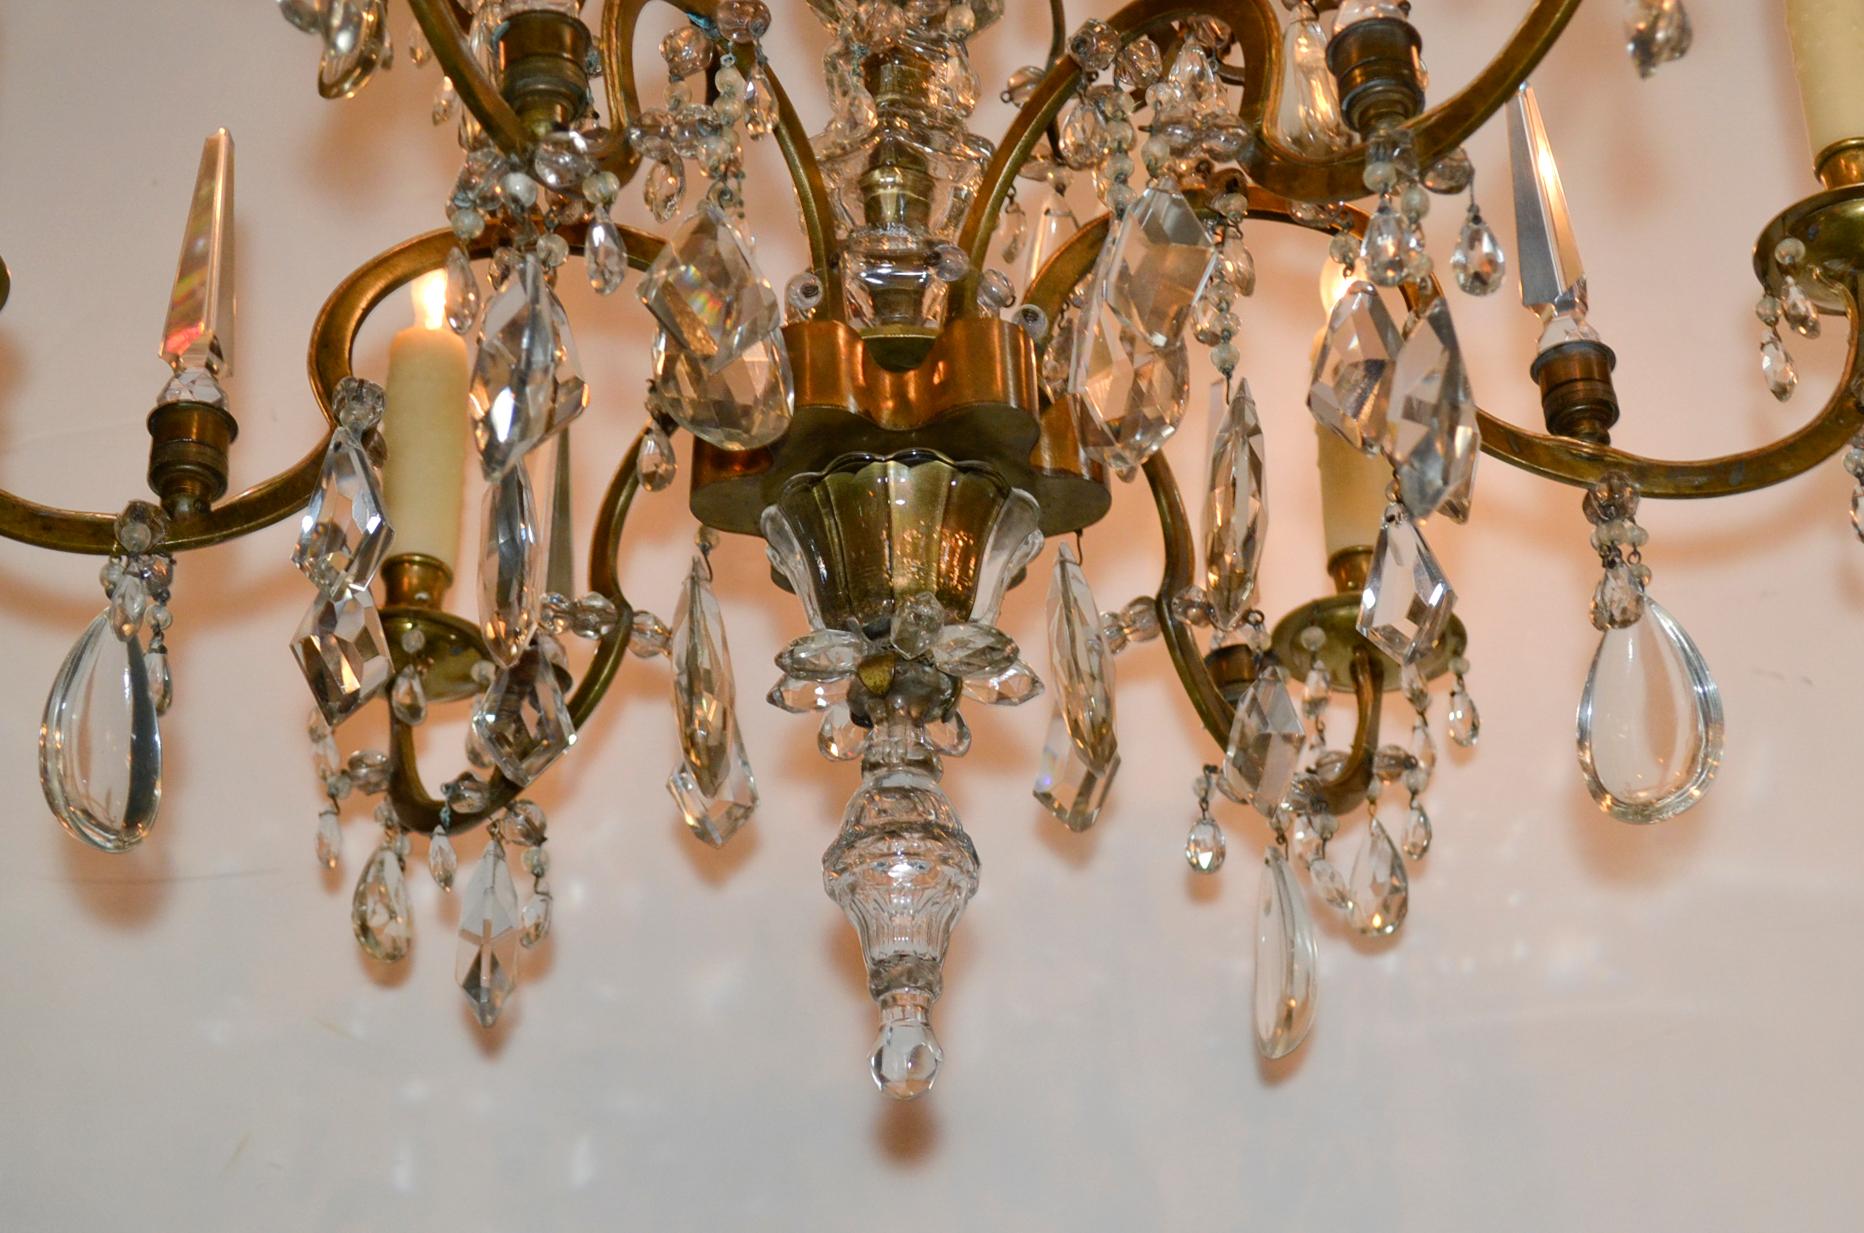 Alluring 19th century French bronze and crystal 6-light chandelier.